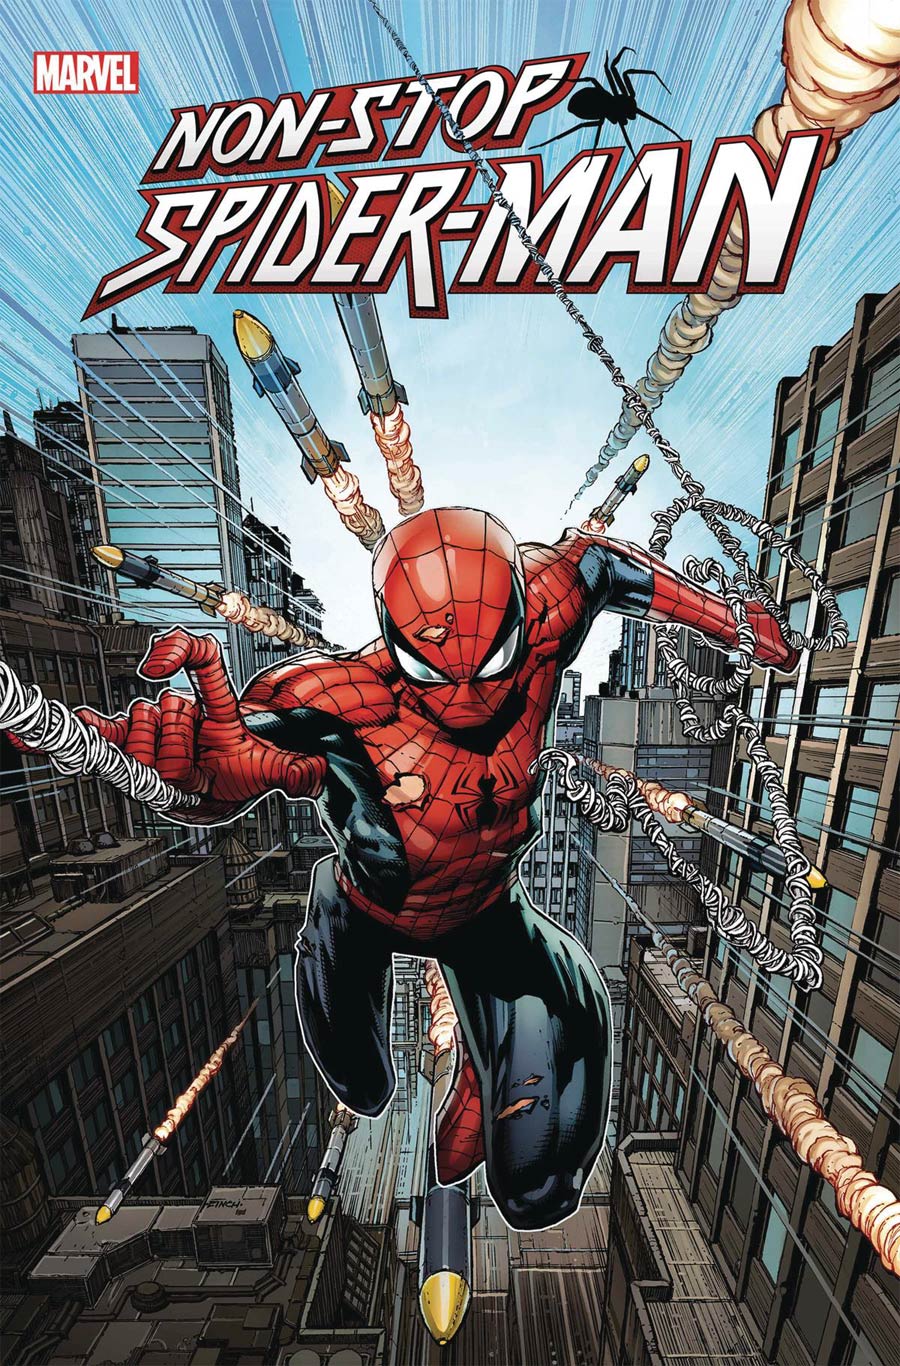 Non-Stop Spider-Man #1 By David Finch Poster